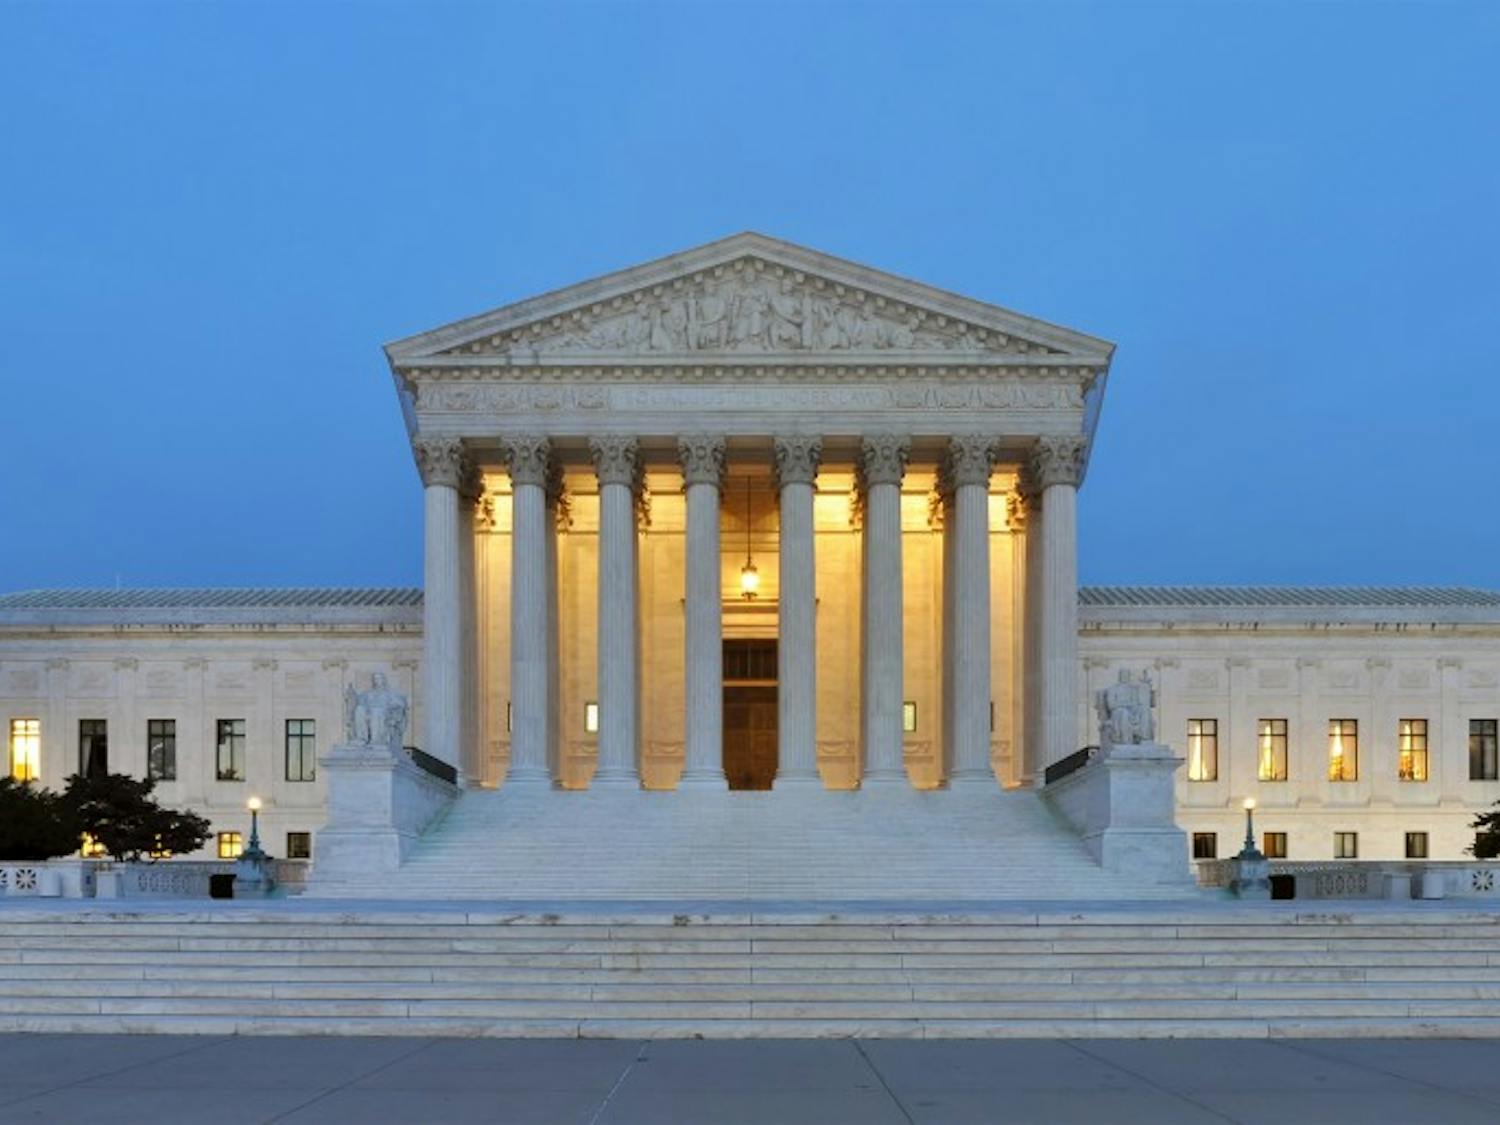 Panorama of the west facade of United States Supreme Court Building is photographed at dusk in Washington, D.C.